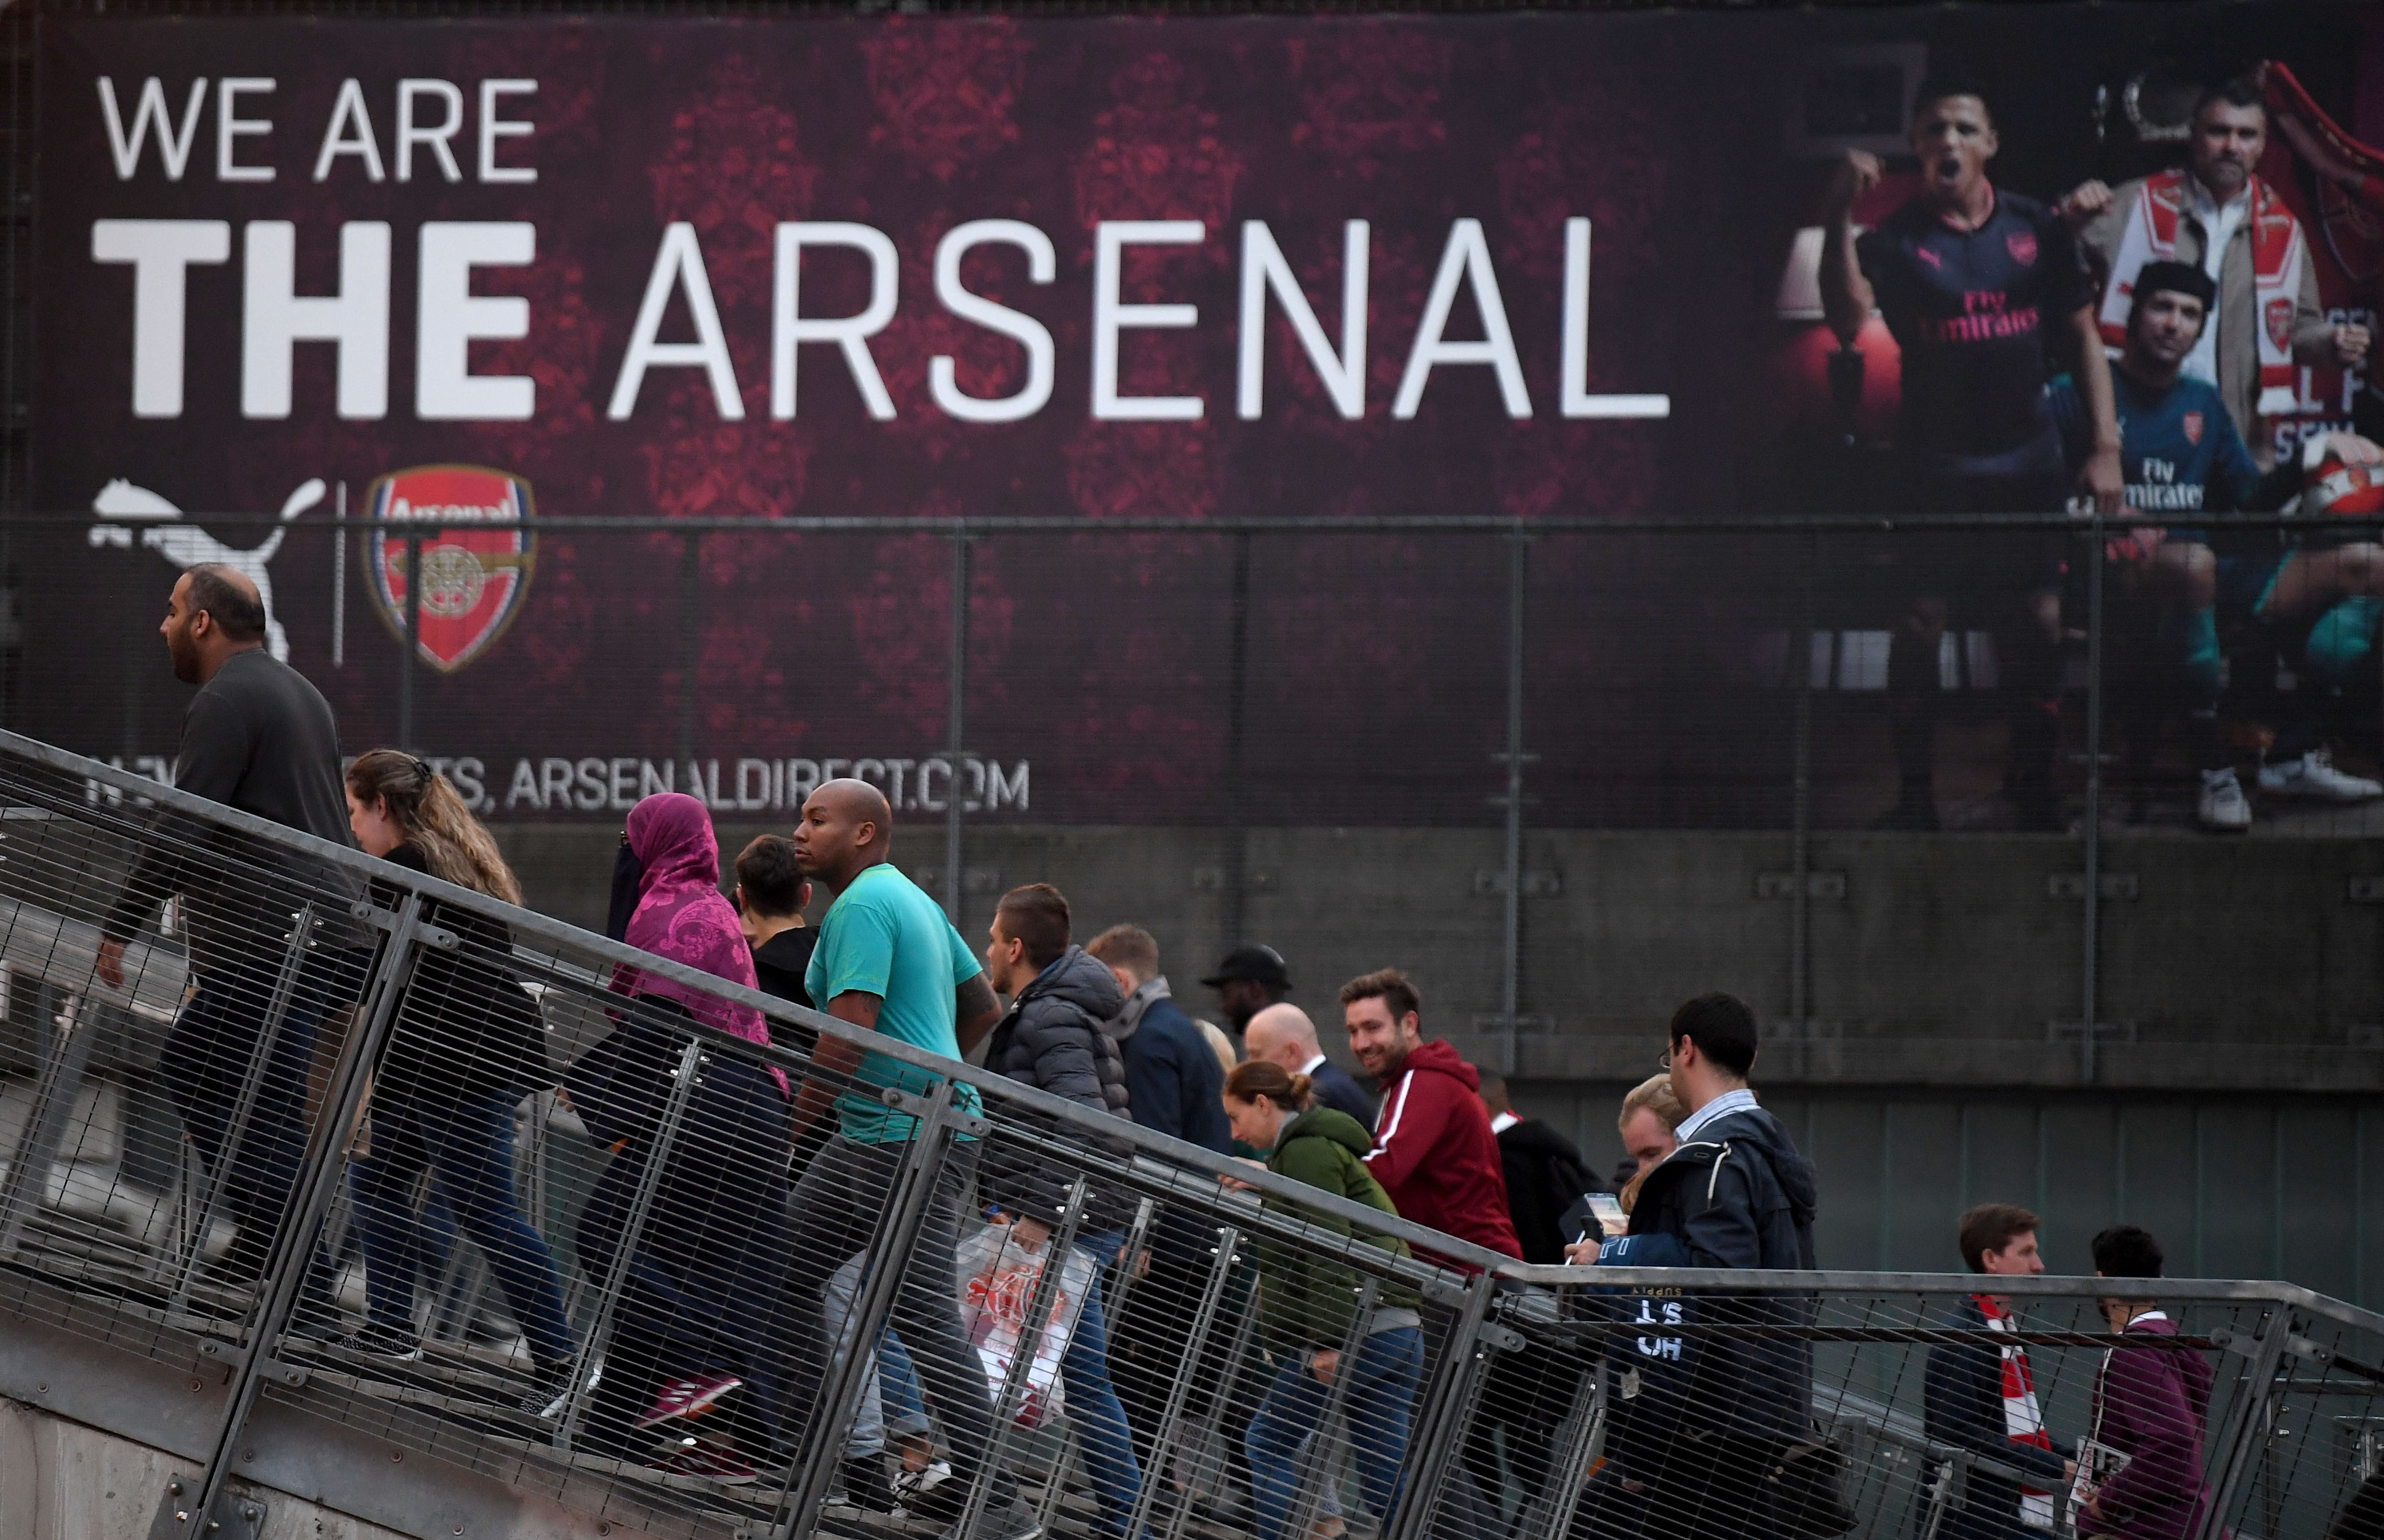 LONDON, ENGLAND - SEPTEMBER 25:  Fans walk outside the stadium prior to the Premier League match between Arsenal and West Bromwich Albion at Emirates Stadium on September 25, 2017 in London, England.  (Photo by Mike Hewitt/Getty Images)